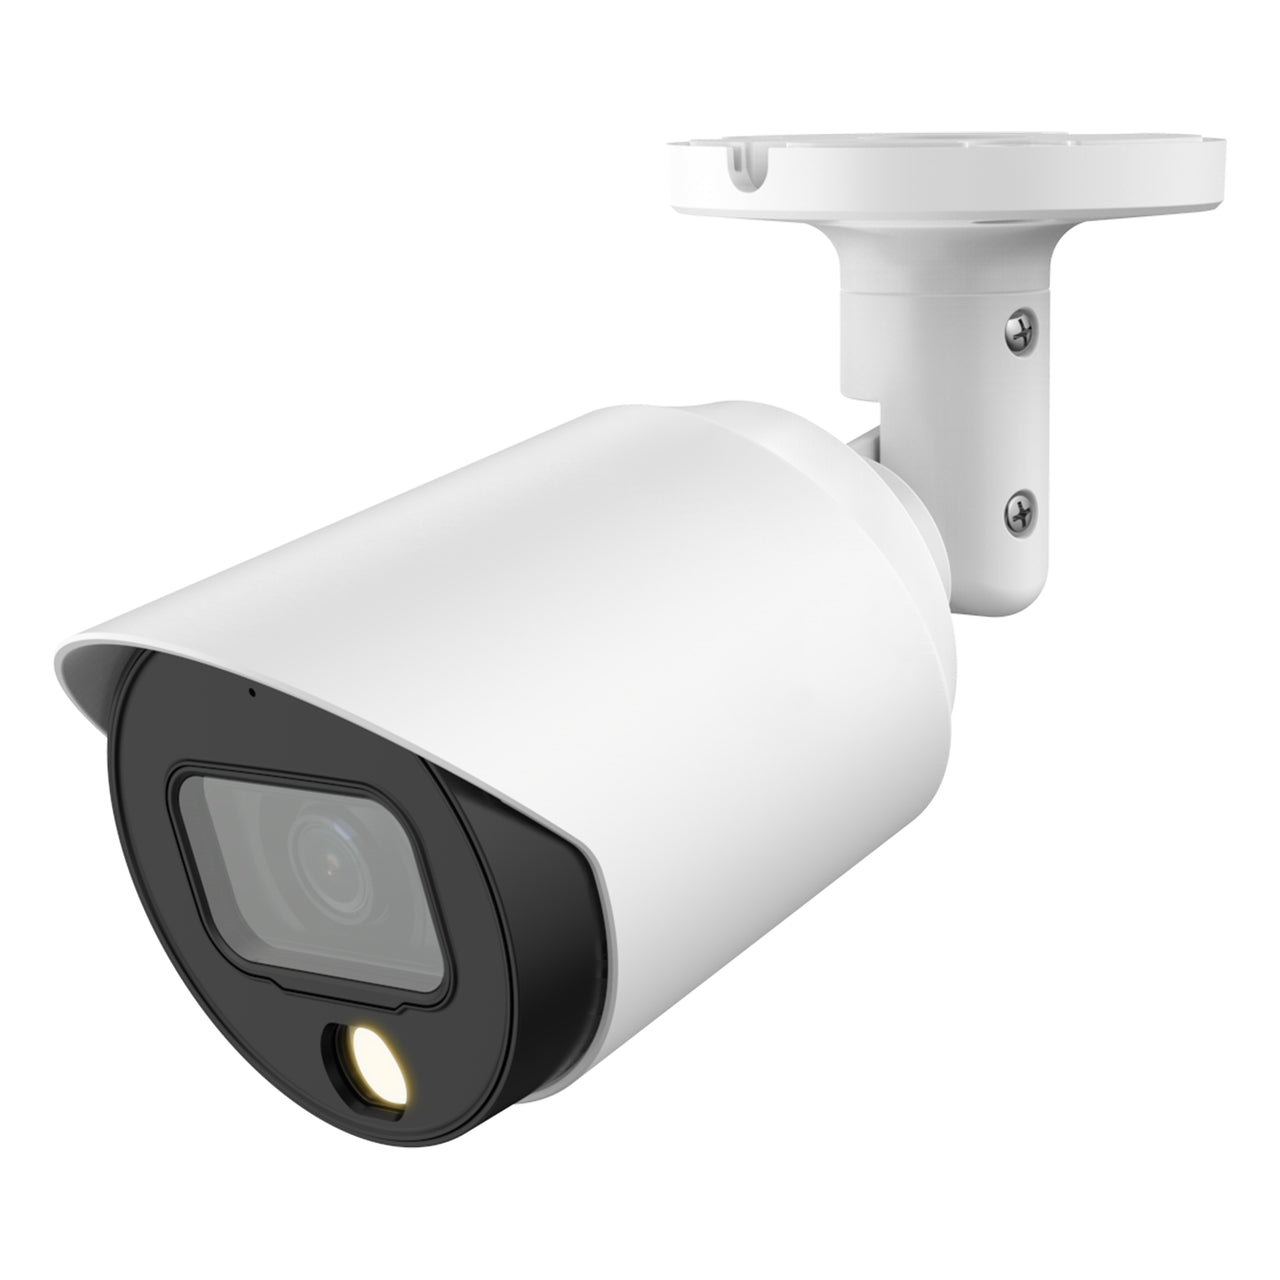 High-definition Analog Security Camera - 8MP(4K) Night Color Vision Front